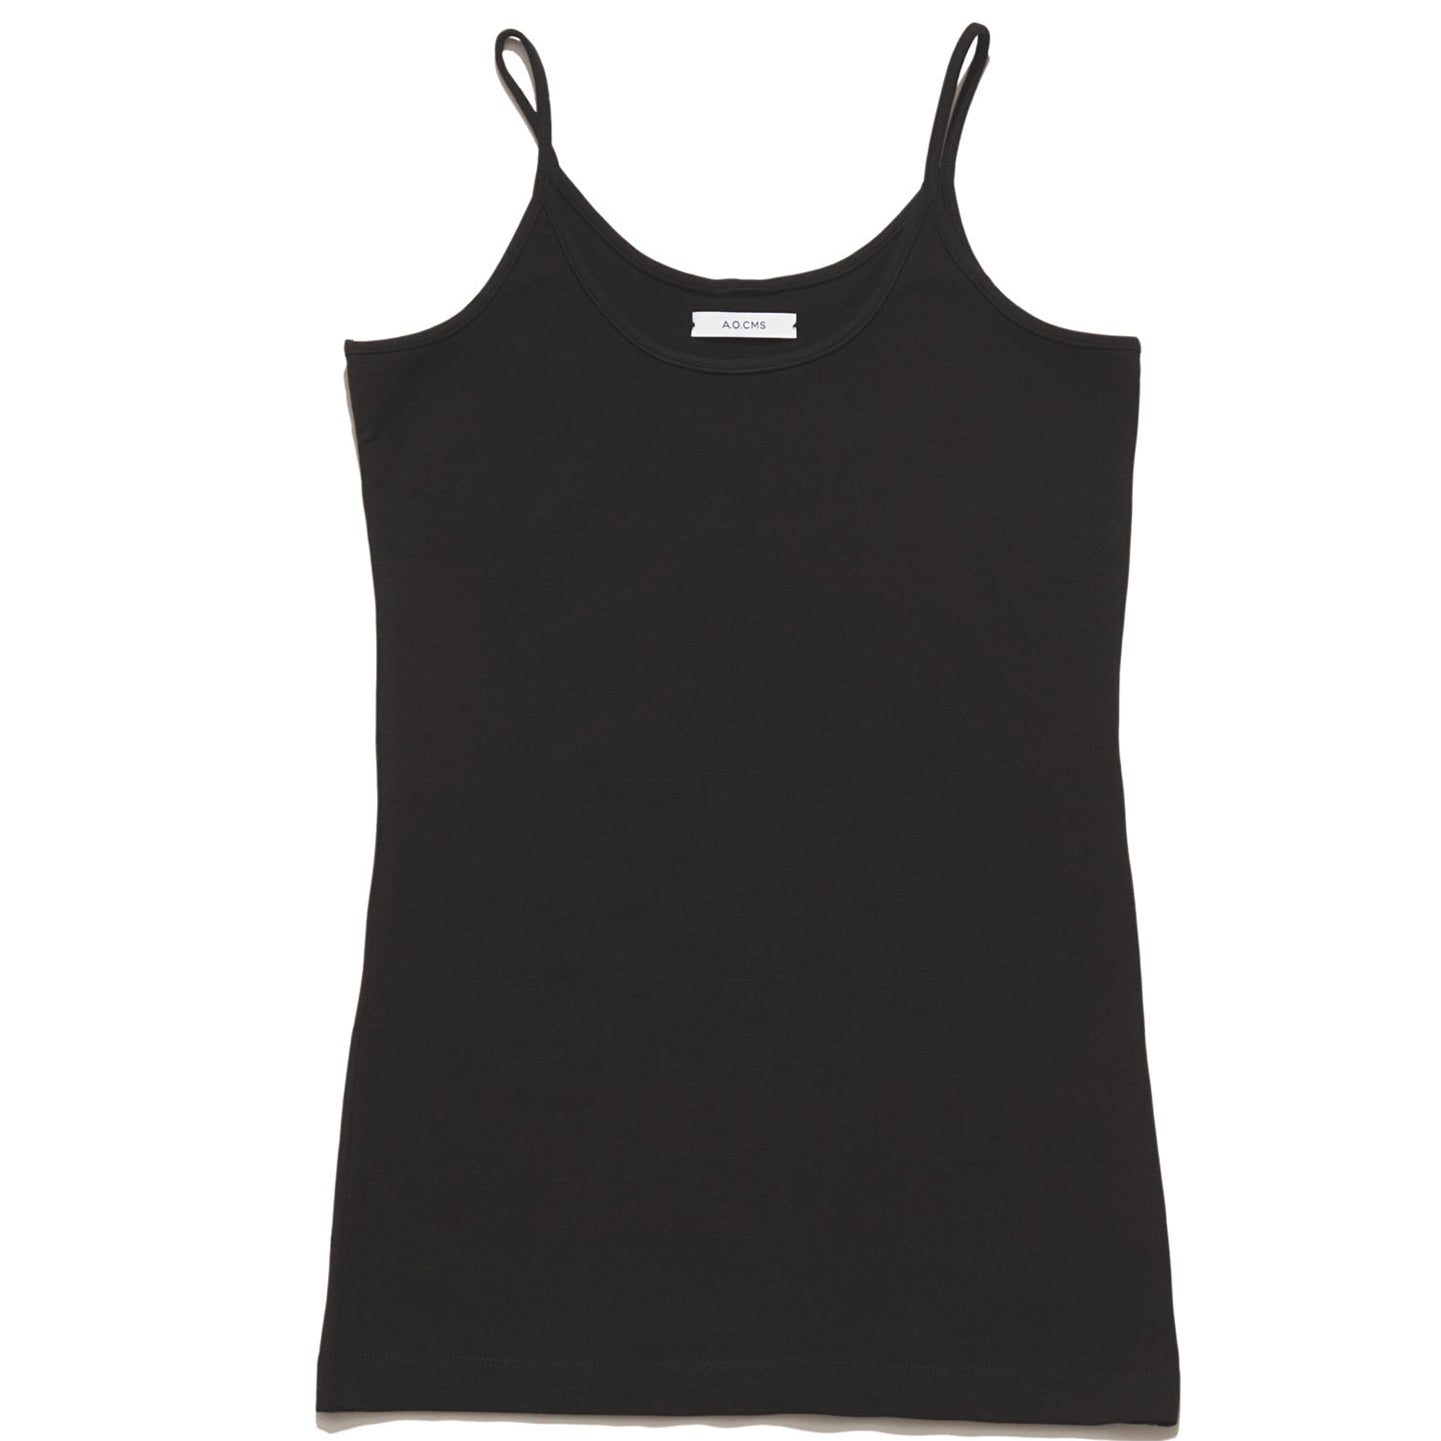 THE CAMISOLE